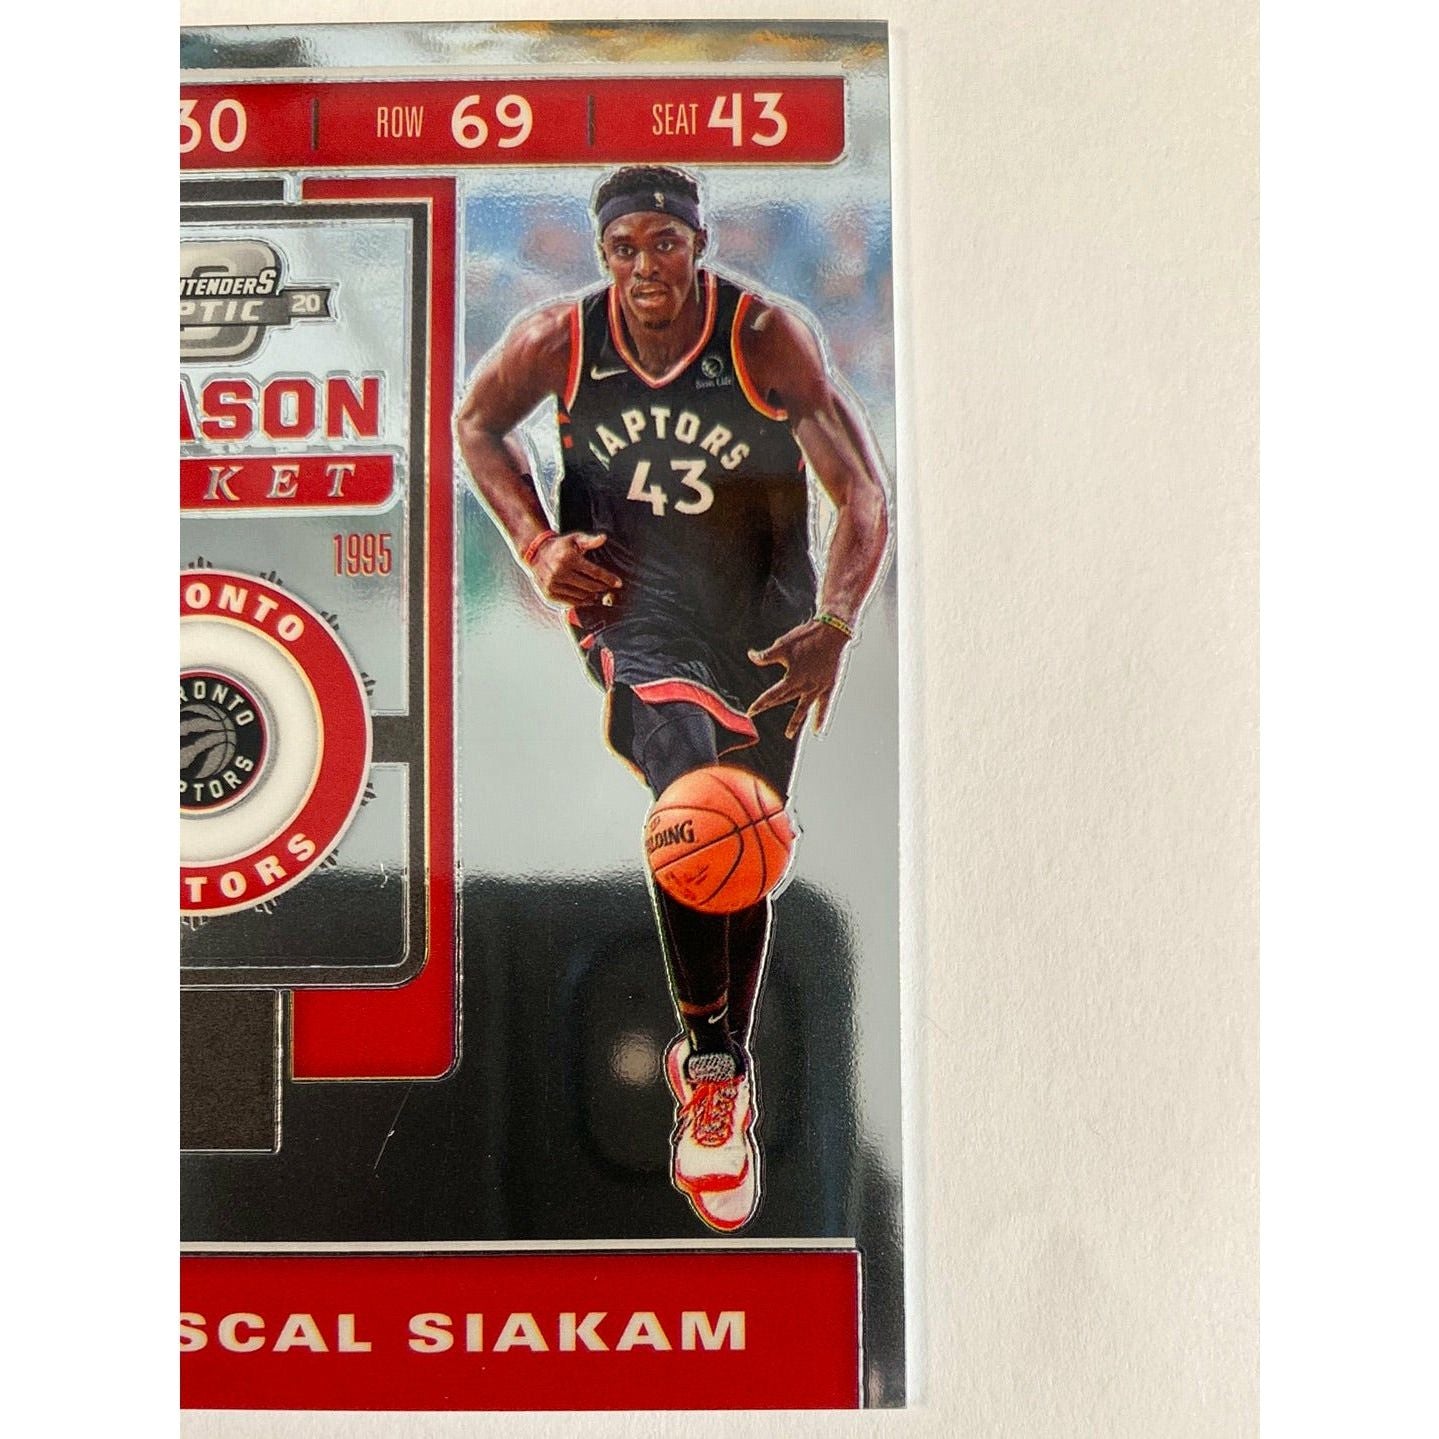  2019-20 Contenders Optic Pascal Siakam Season Ticket  Local Legends Cards & Collectibles